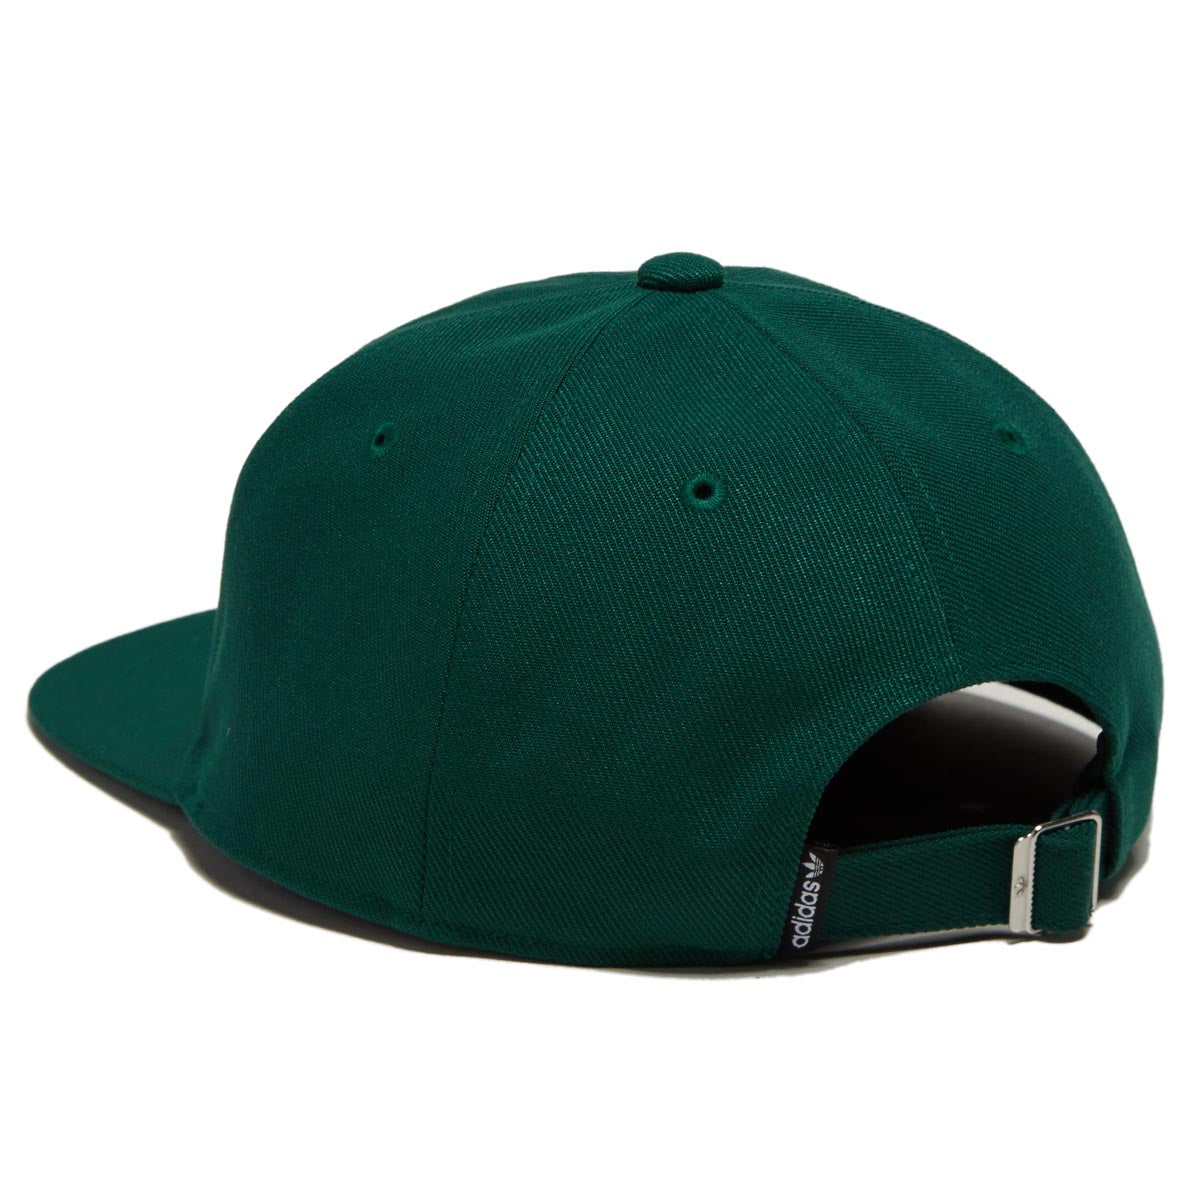 Adidas Arched Logo Hat - Core Green image 2